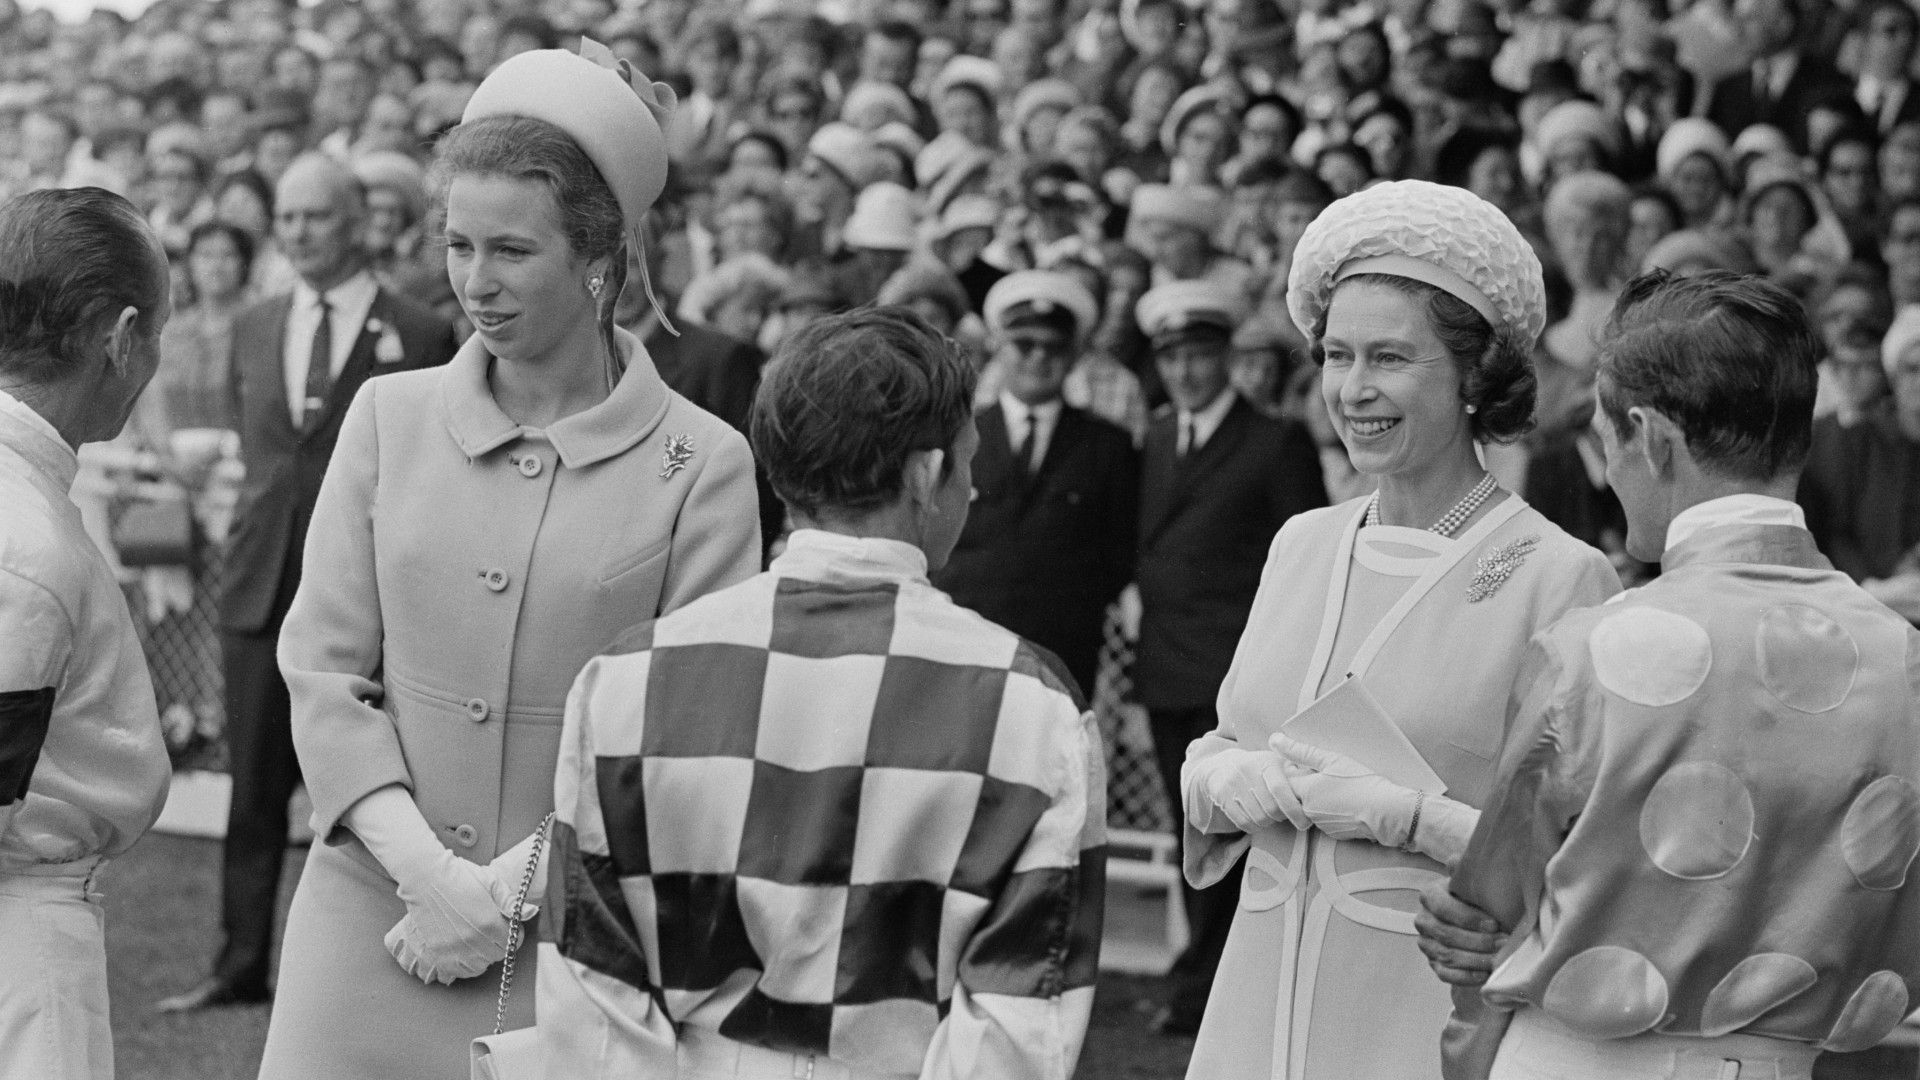 <p>                     Queen Elizabeth II indulged in one of the greatest passions in her life during a trip to Sydney, Australia, when she visited the Randwick Racecourse in April 1970 alongside Princess Anne.                   </p>                                      <p>                     She first visited the racecourse during her 1954 visit to the country, during which they named a race after her, the Queen Elizabeth II Stakes.                   </p>                                      <p>                     During her second visit in the 70s, the horse Panvale won with 100/1 odds, and the apprentice jockey riding him, Peter Cook, won his first race as a jockey. To celebrate, the Queen presented Peter with his winning trophy, and appeared delighted at his early success in a sport she loved so much.                   </p>